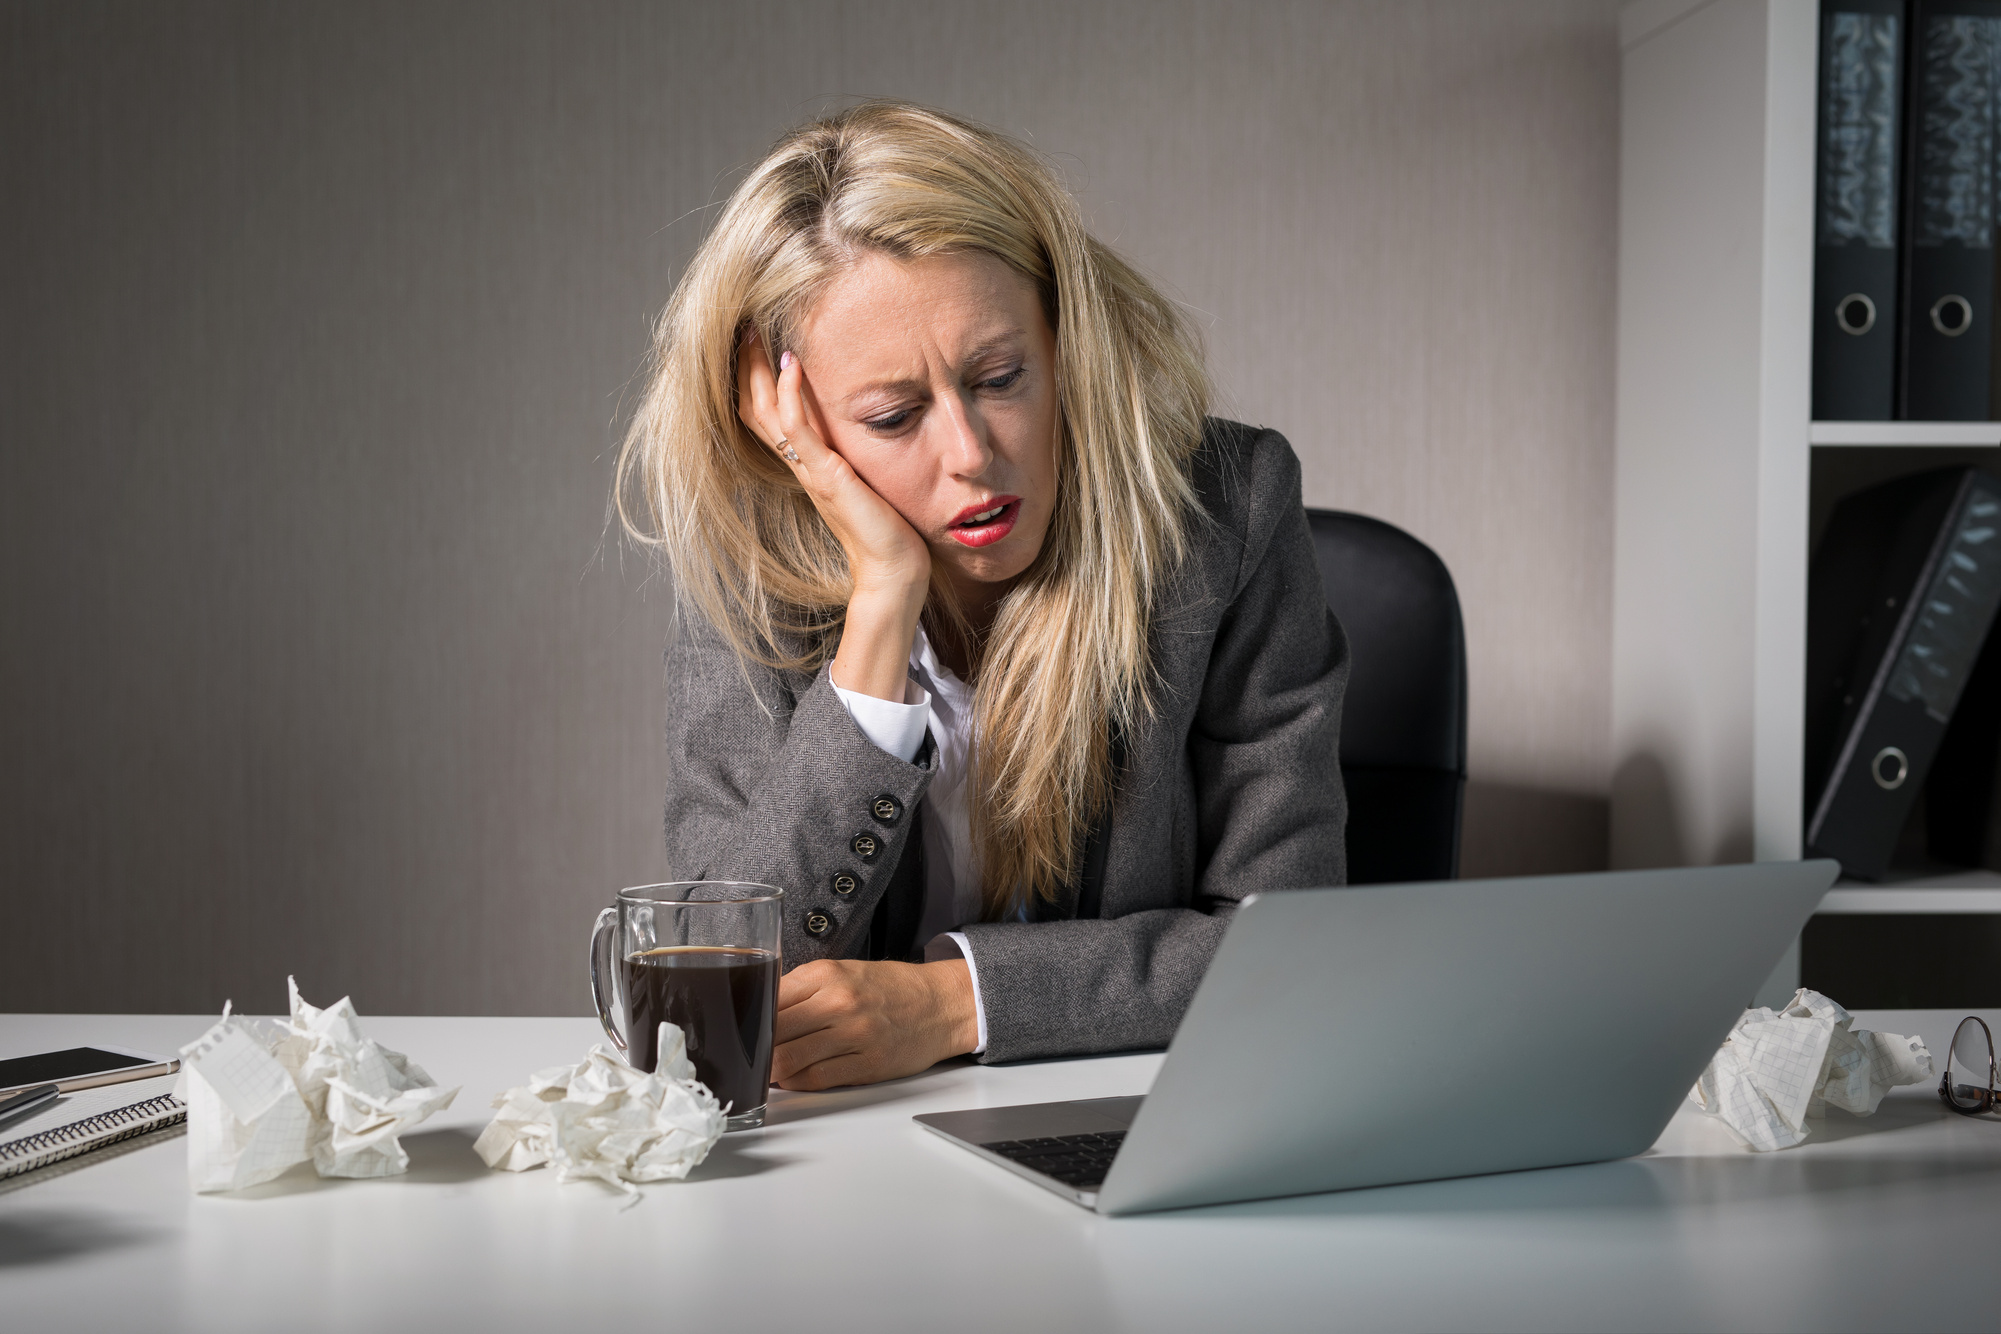 Frustrated Woman at Work